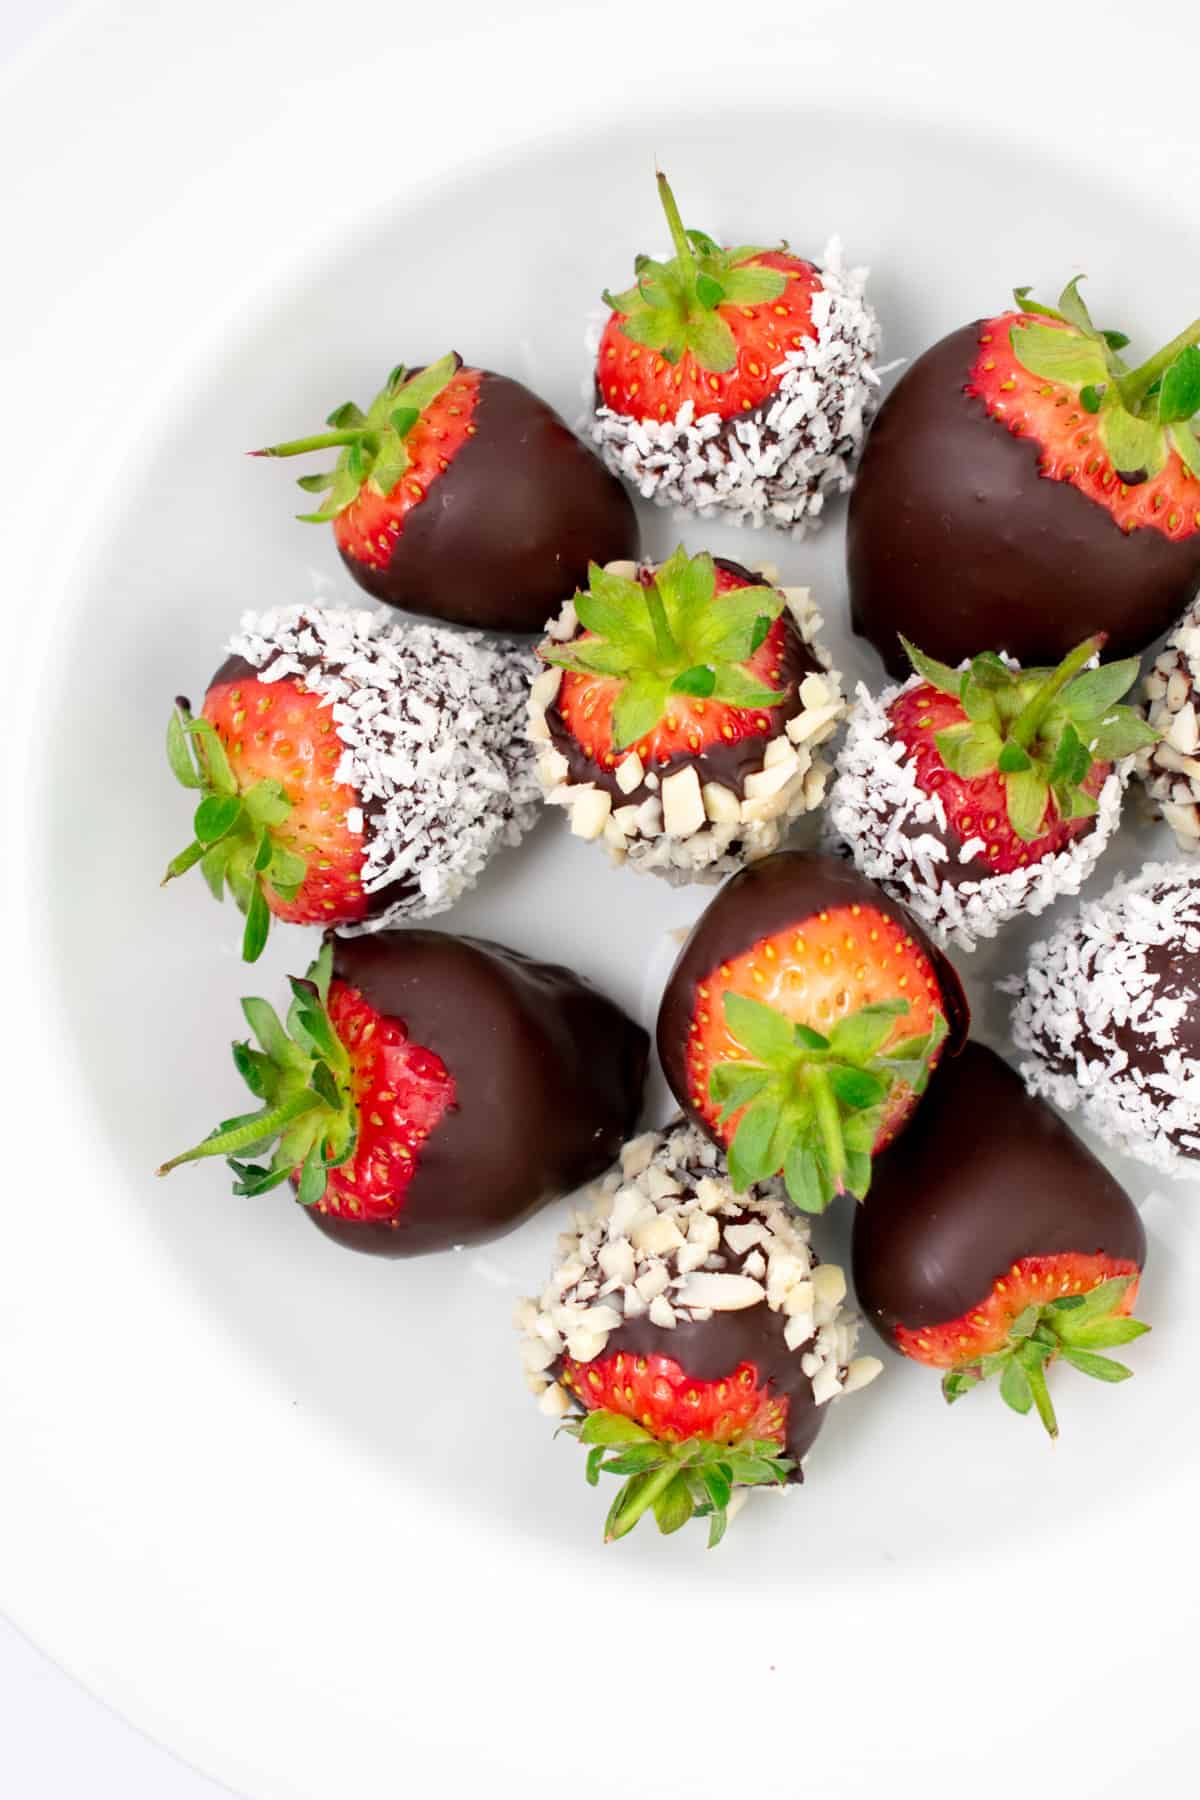 Strawberries covered in chocolate, coconut and almonds in a white bowl.